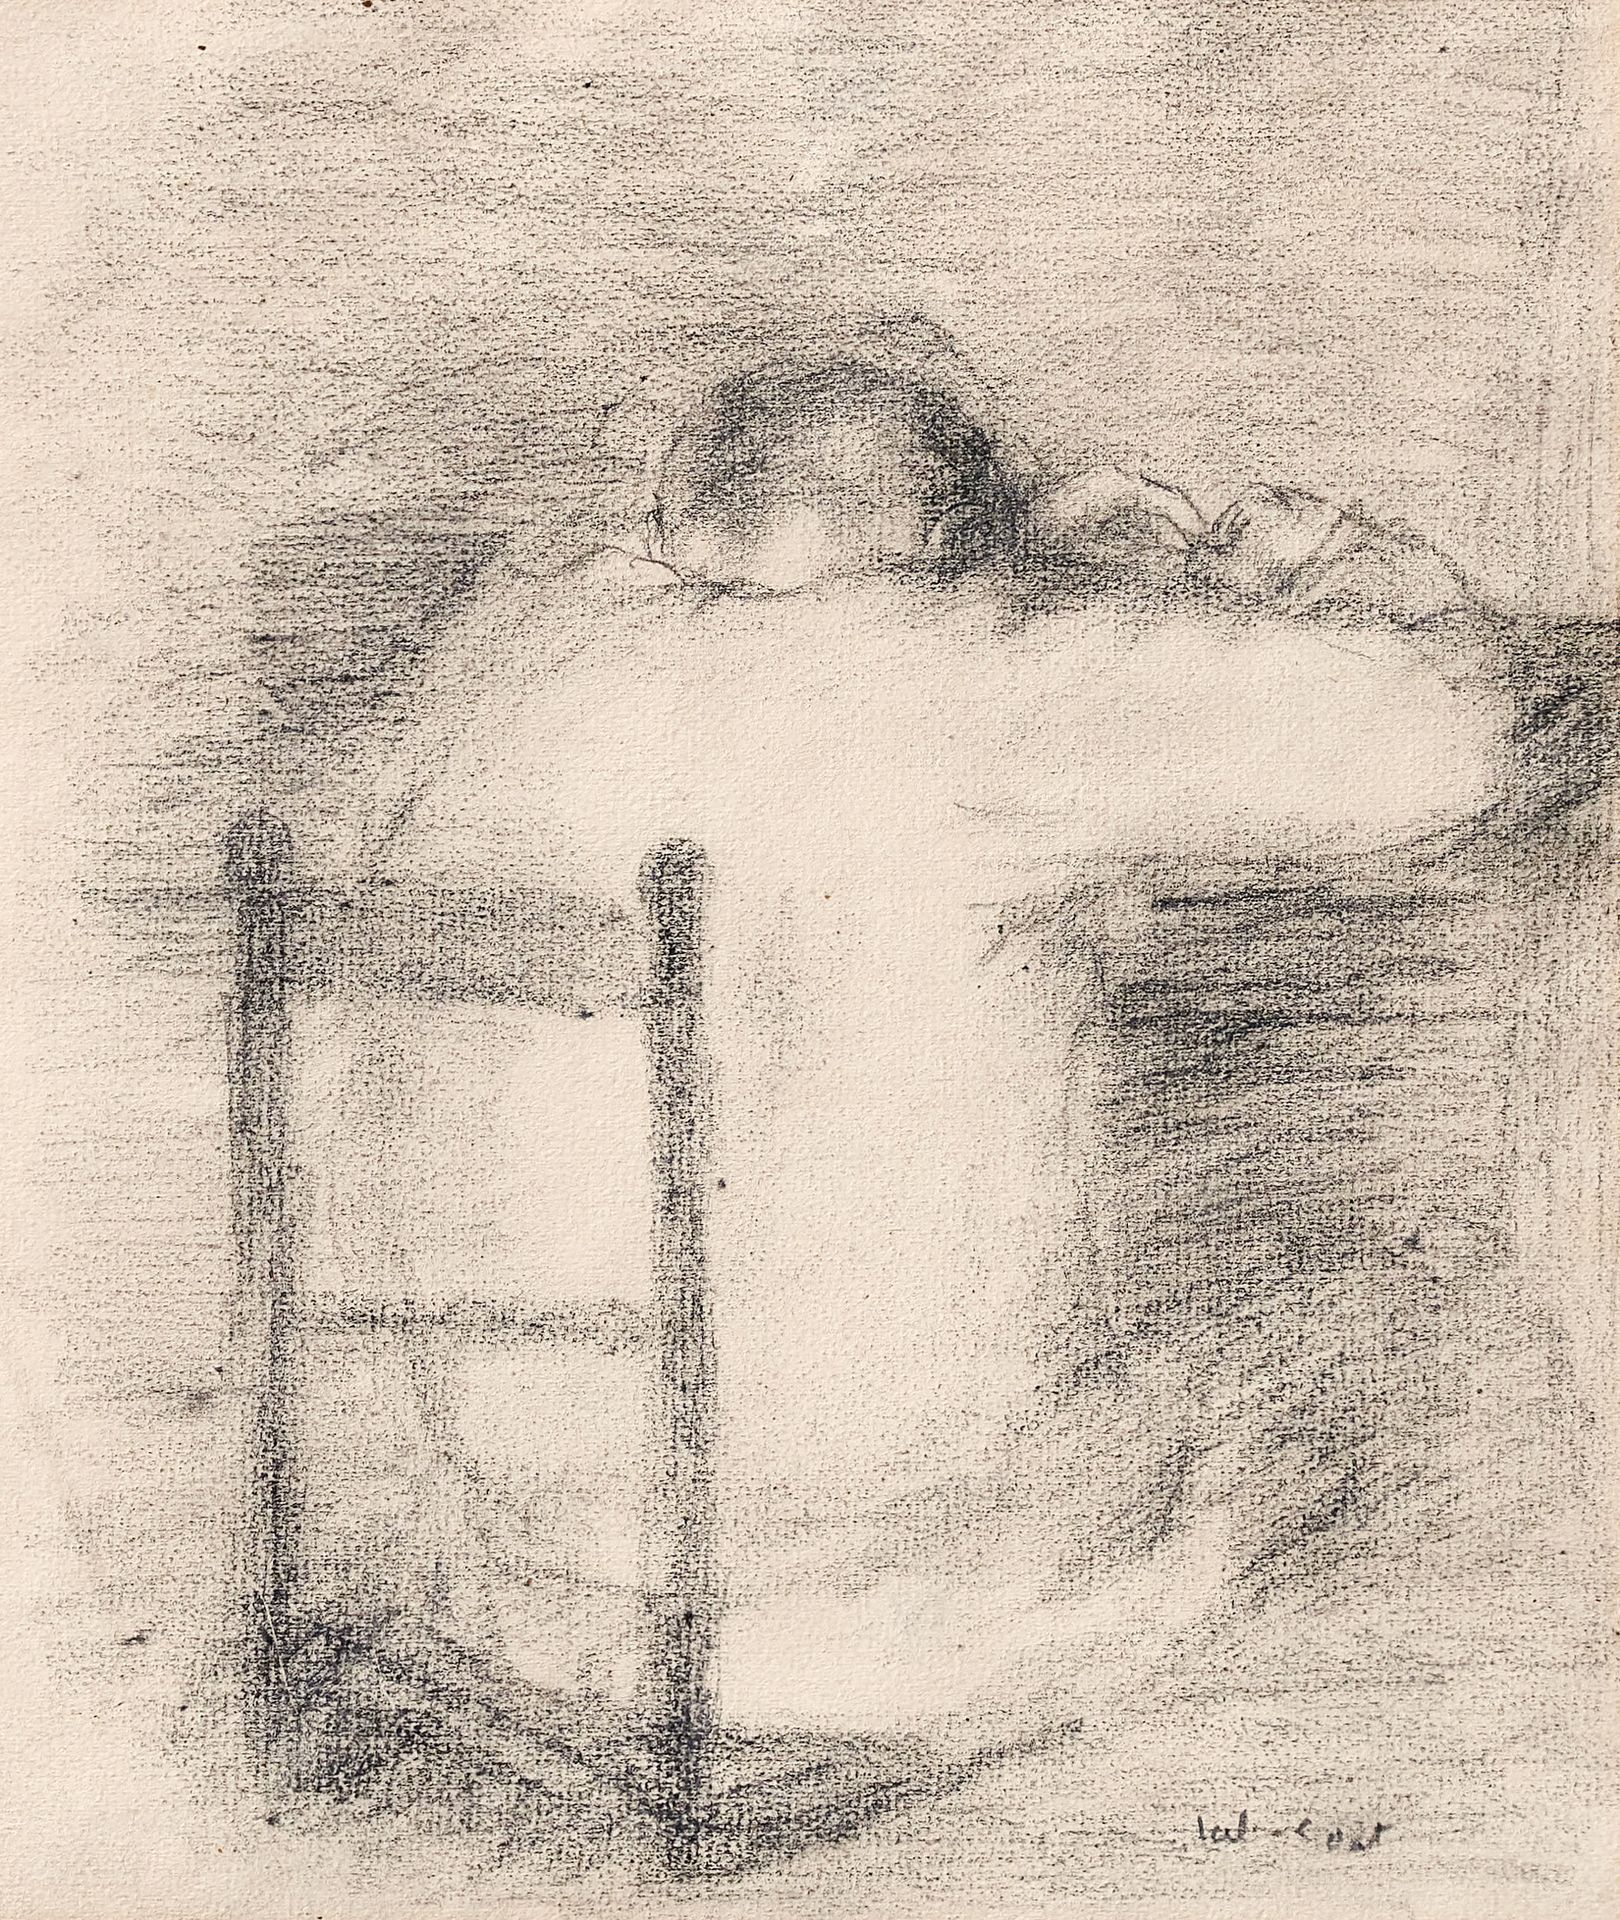 Null PIERRE TAL-COAT (1905-1985)

The sleeping child

Charcoal on paper

Signed &hellip;